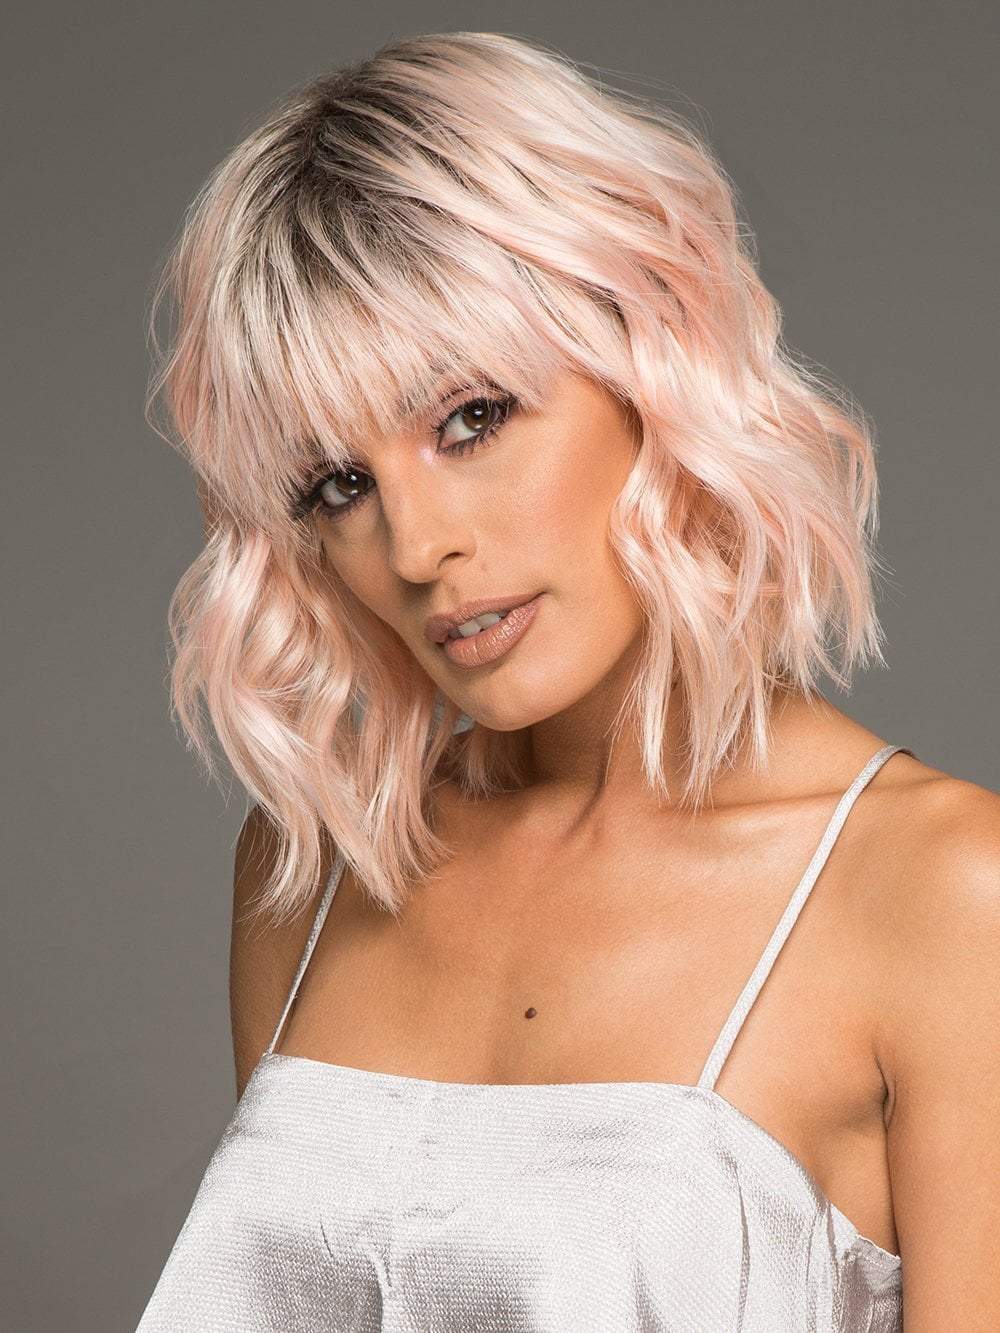 PEACHY KEEN by HAIRDO in PEACH | Light Peachy-Pink Rooted | The bangs were cut & customized for this photo